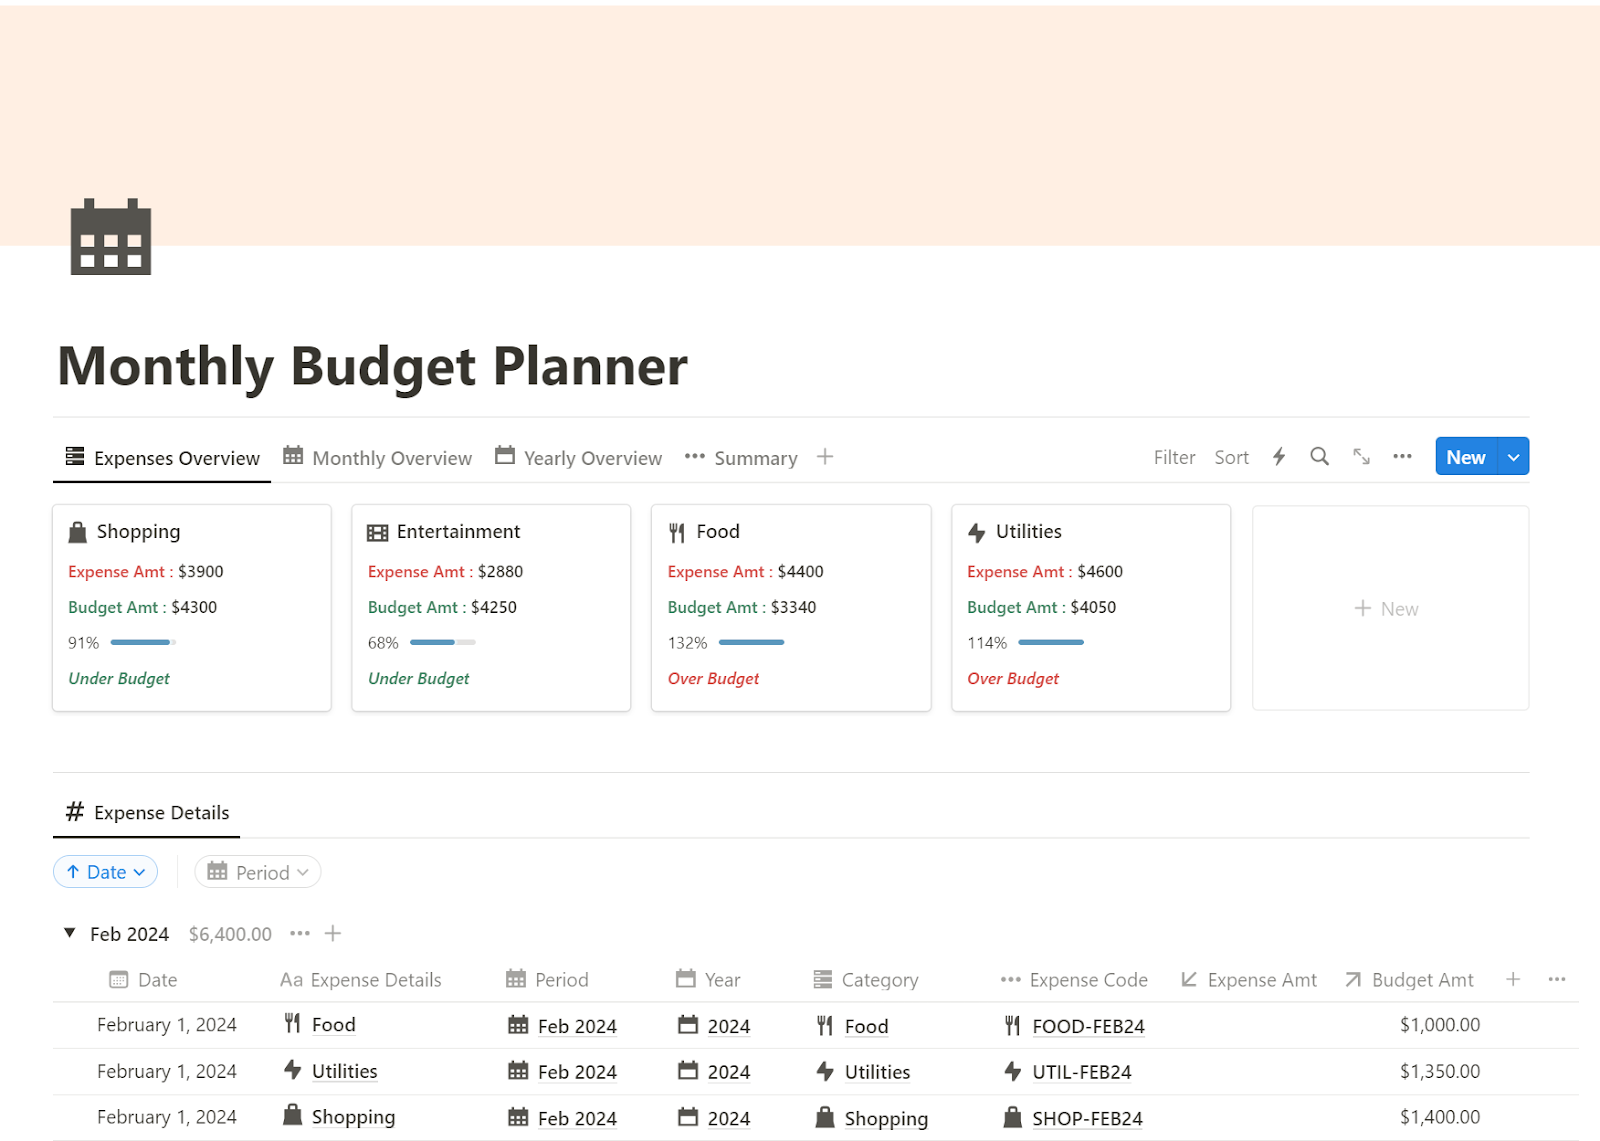 Expenses Overview of Notion Monthly Budget Planner